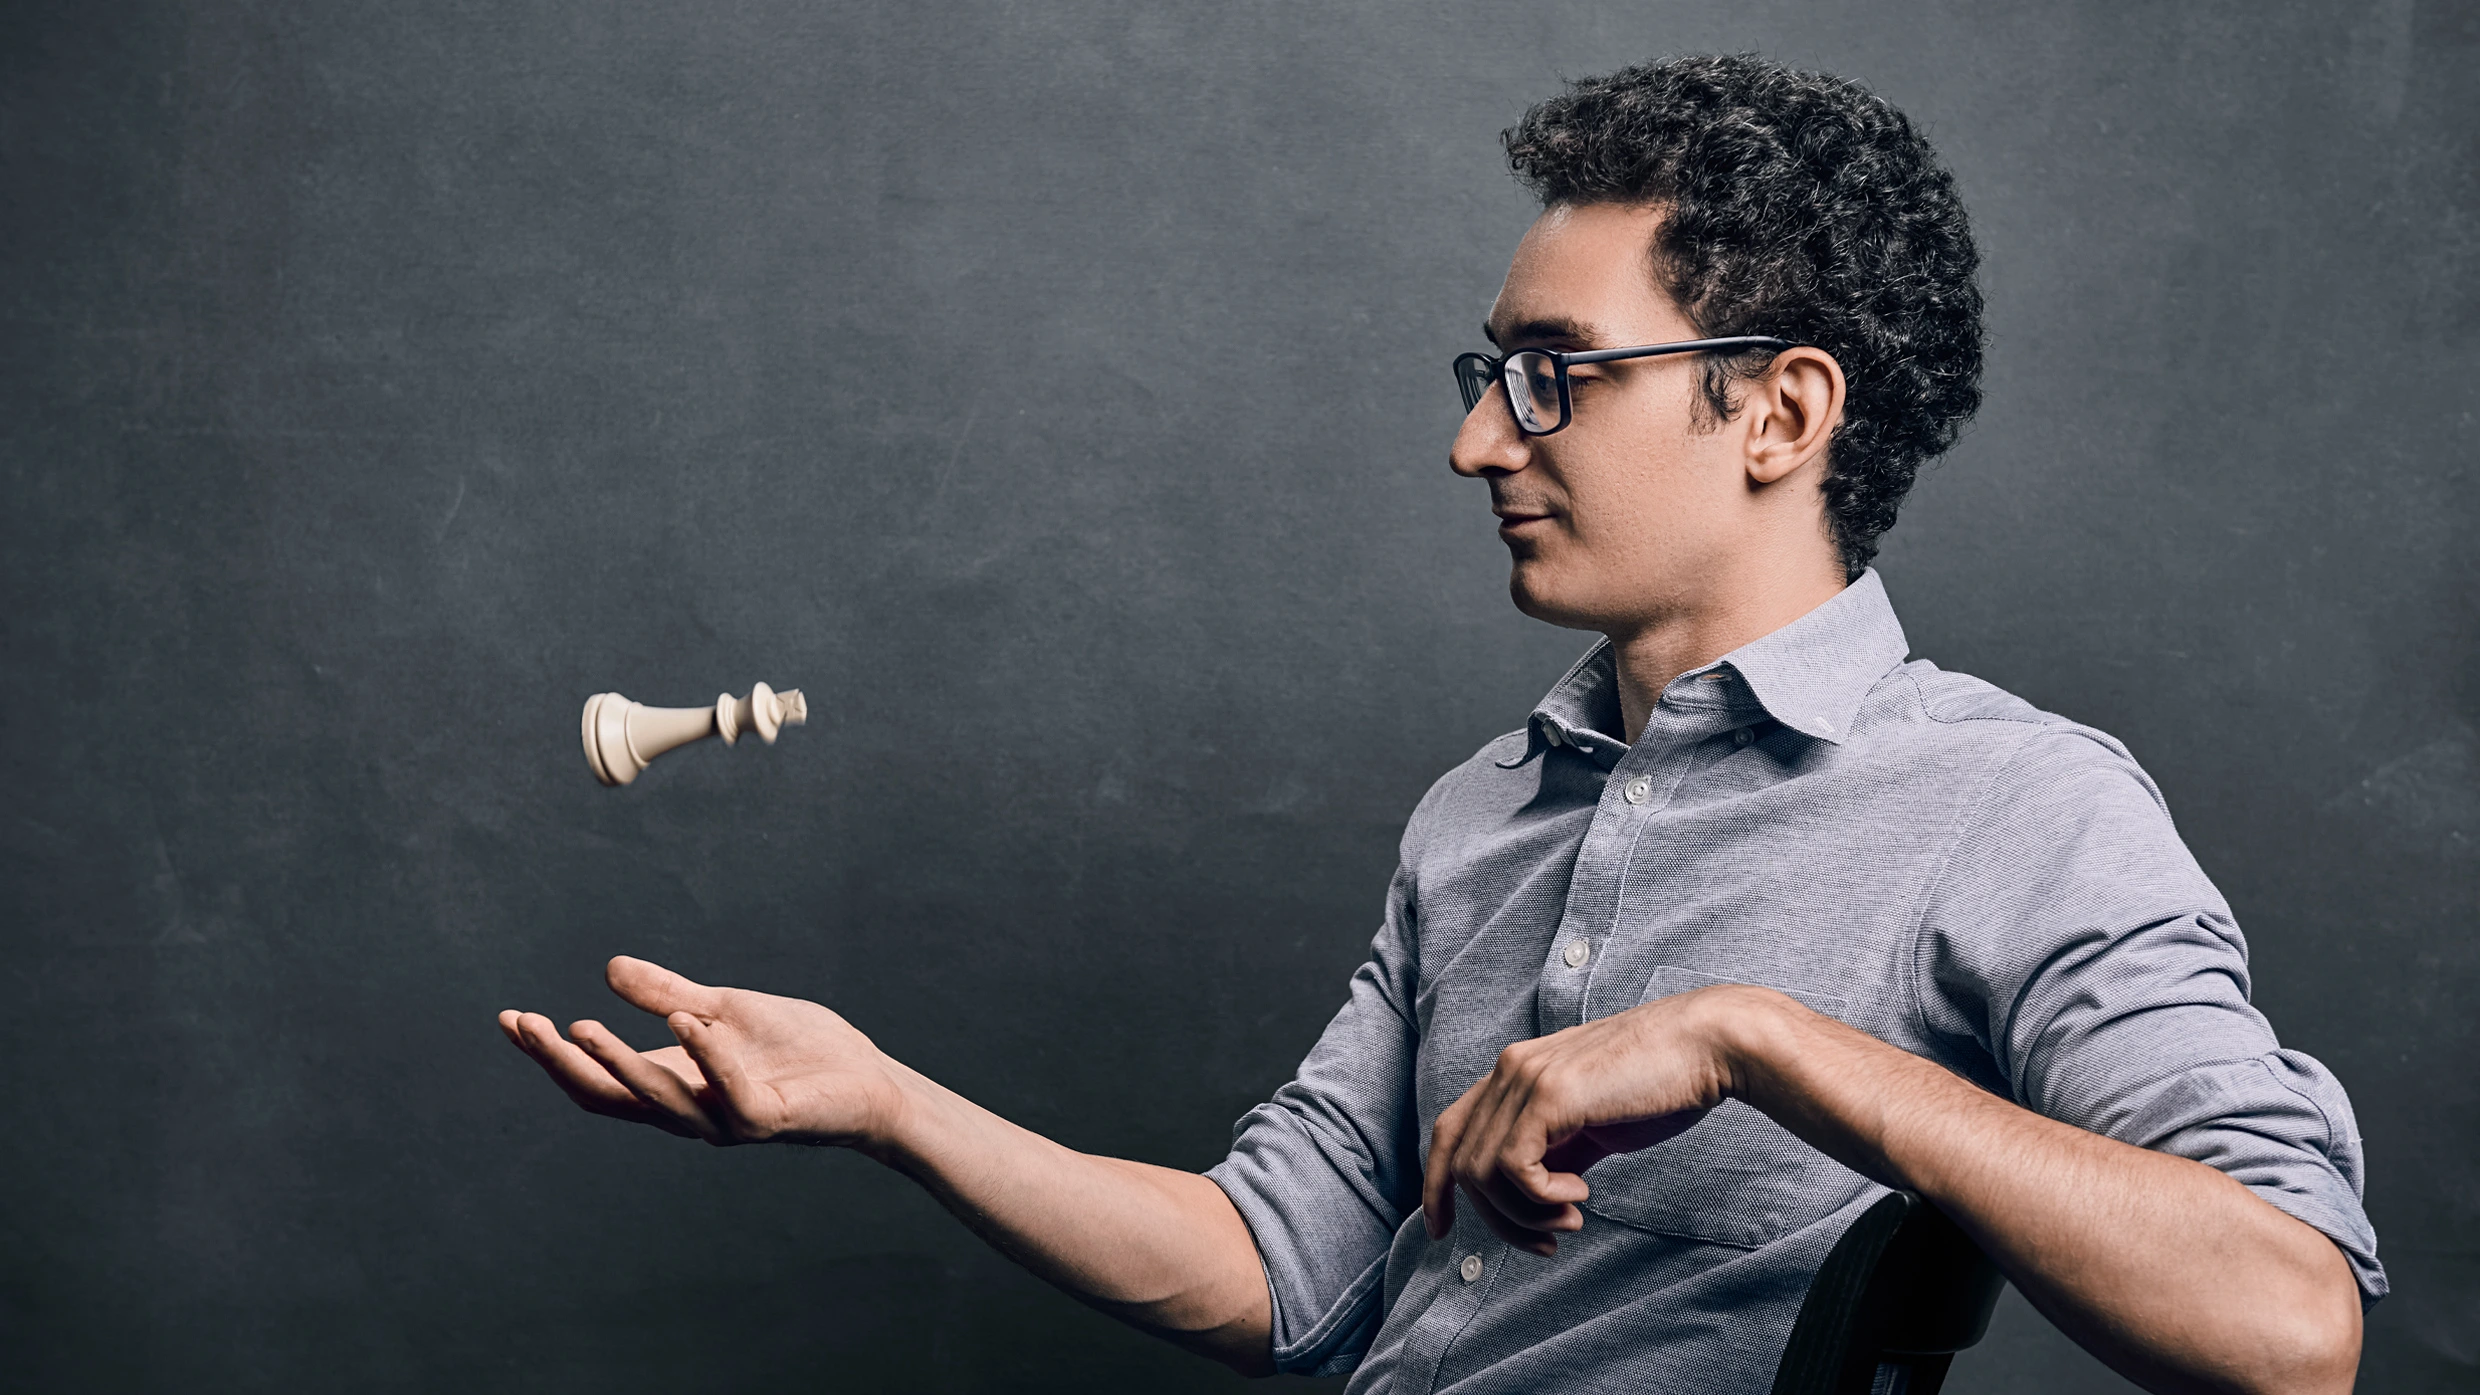 2023 U.S. Chess Champions: Grandmaster Fabiano Caruana Defends Title to  Become a Three-Time U.S. Champion; International Master Carissa Yip Wins  Second Title in Women's Division